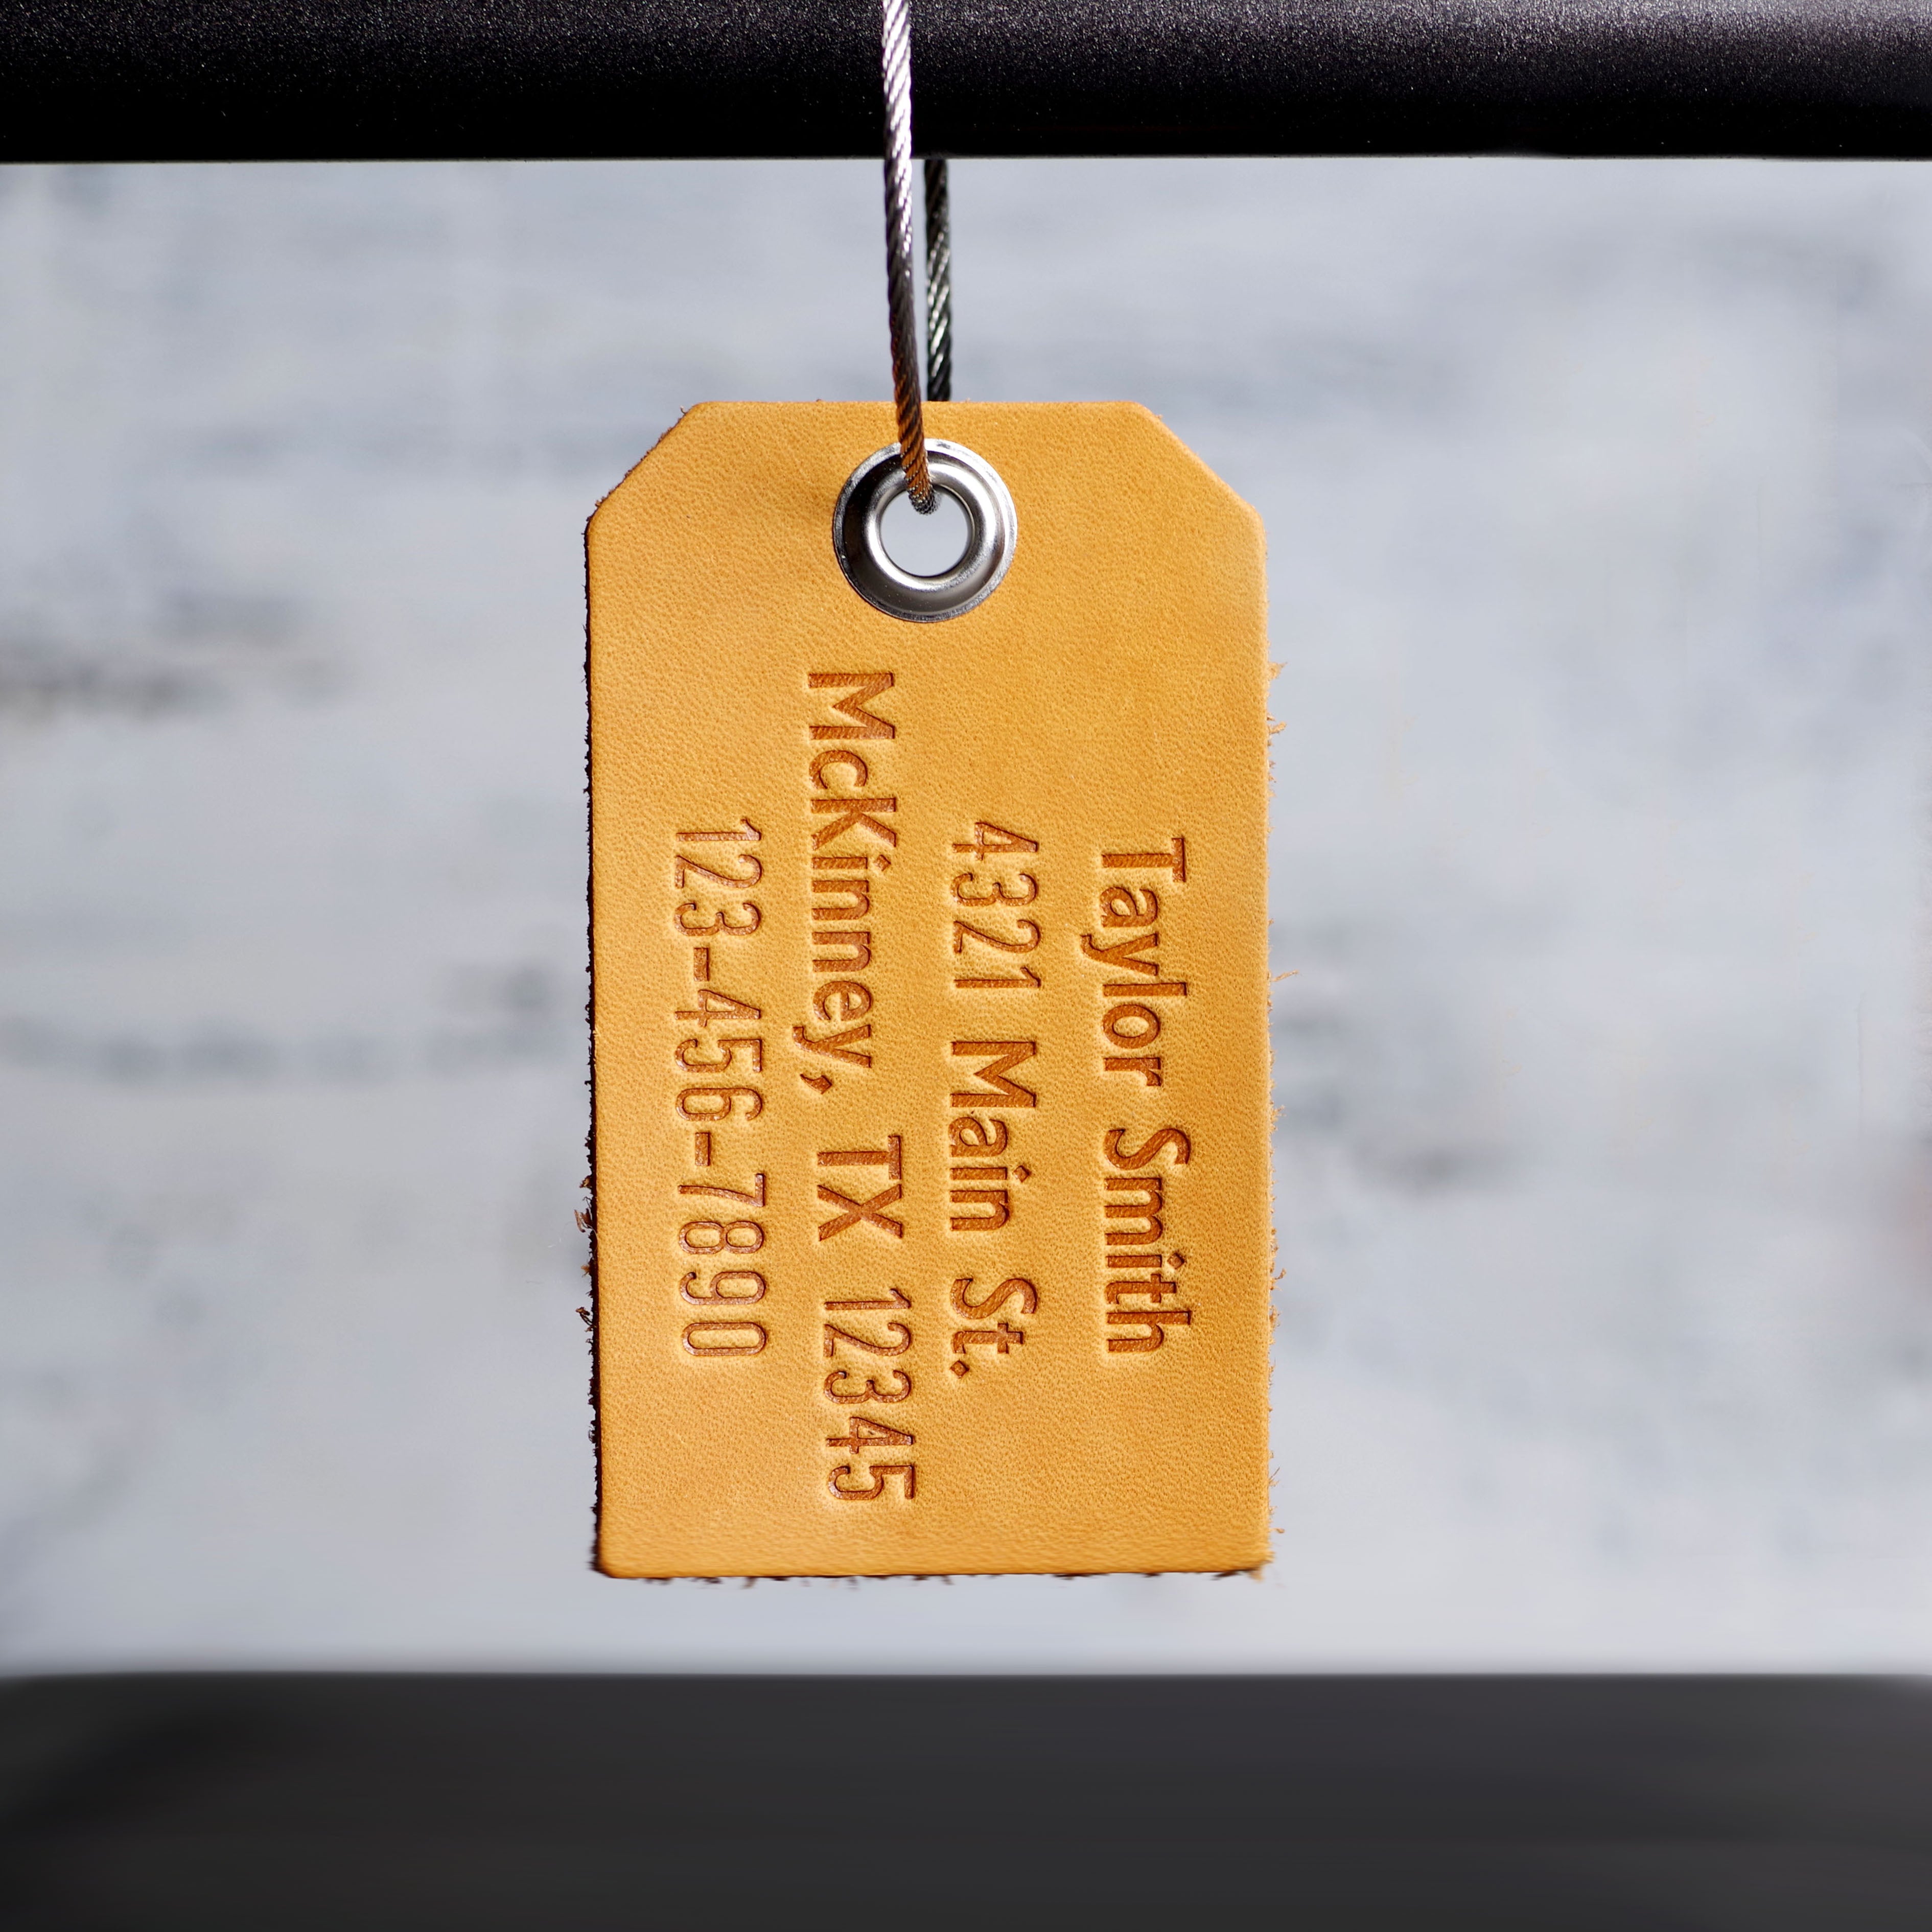 Luggage Tags: Brown Leather Tag  custom luggage tag by KMM & Co.